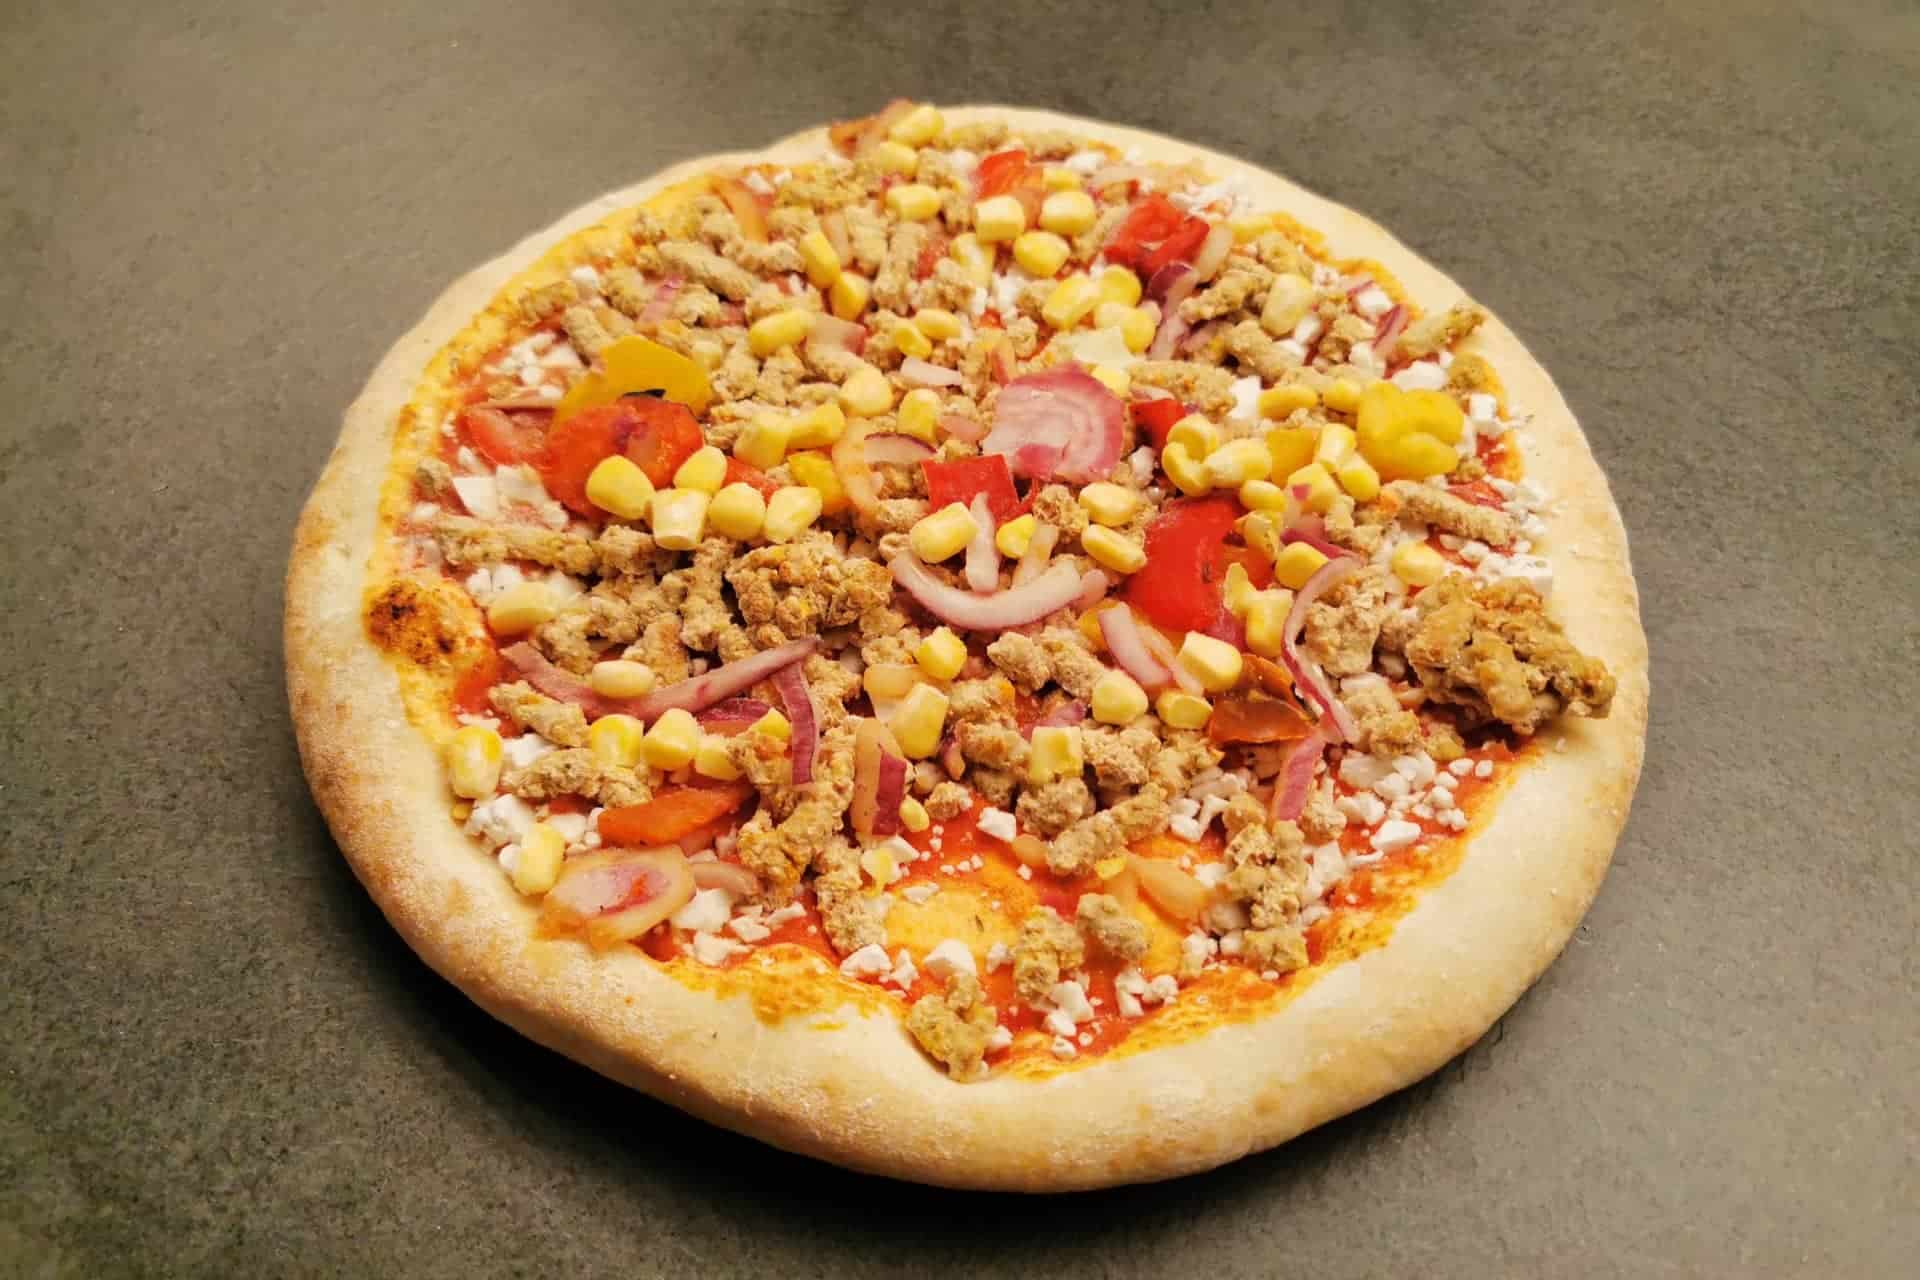 Food for Future: Pizza Taco Style